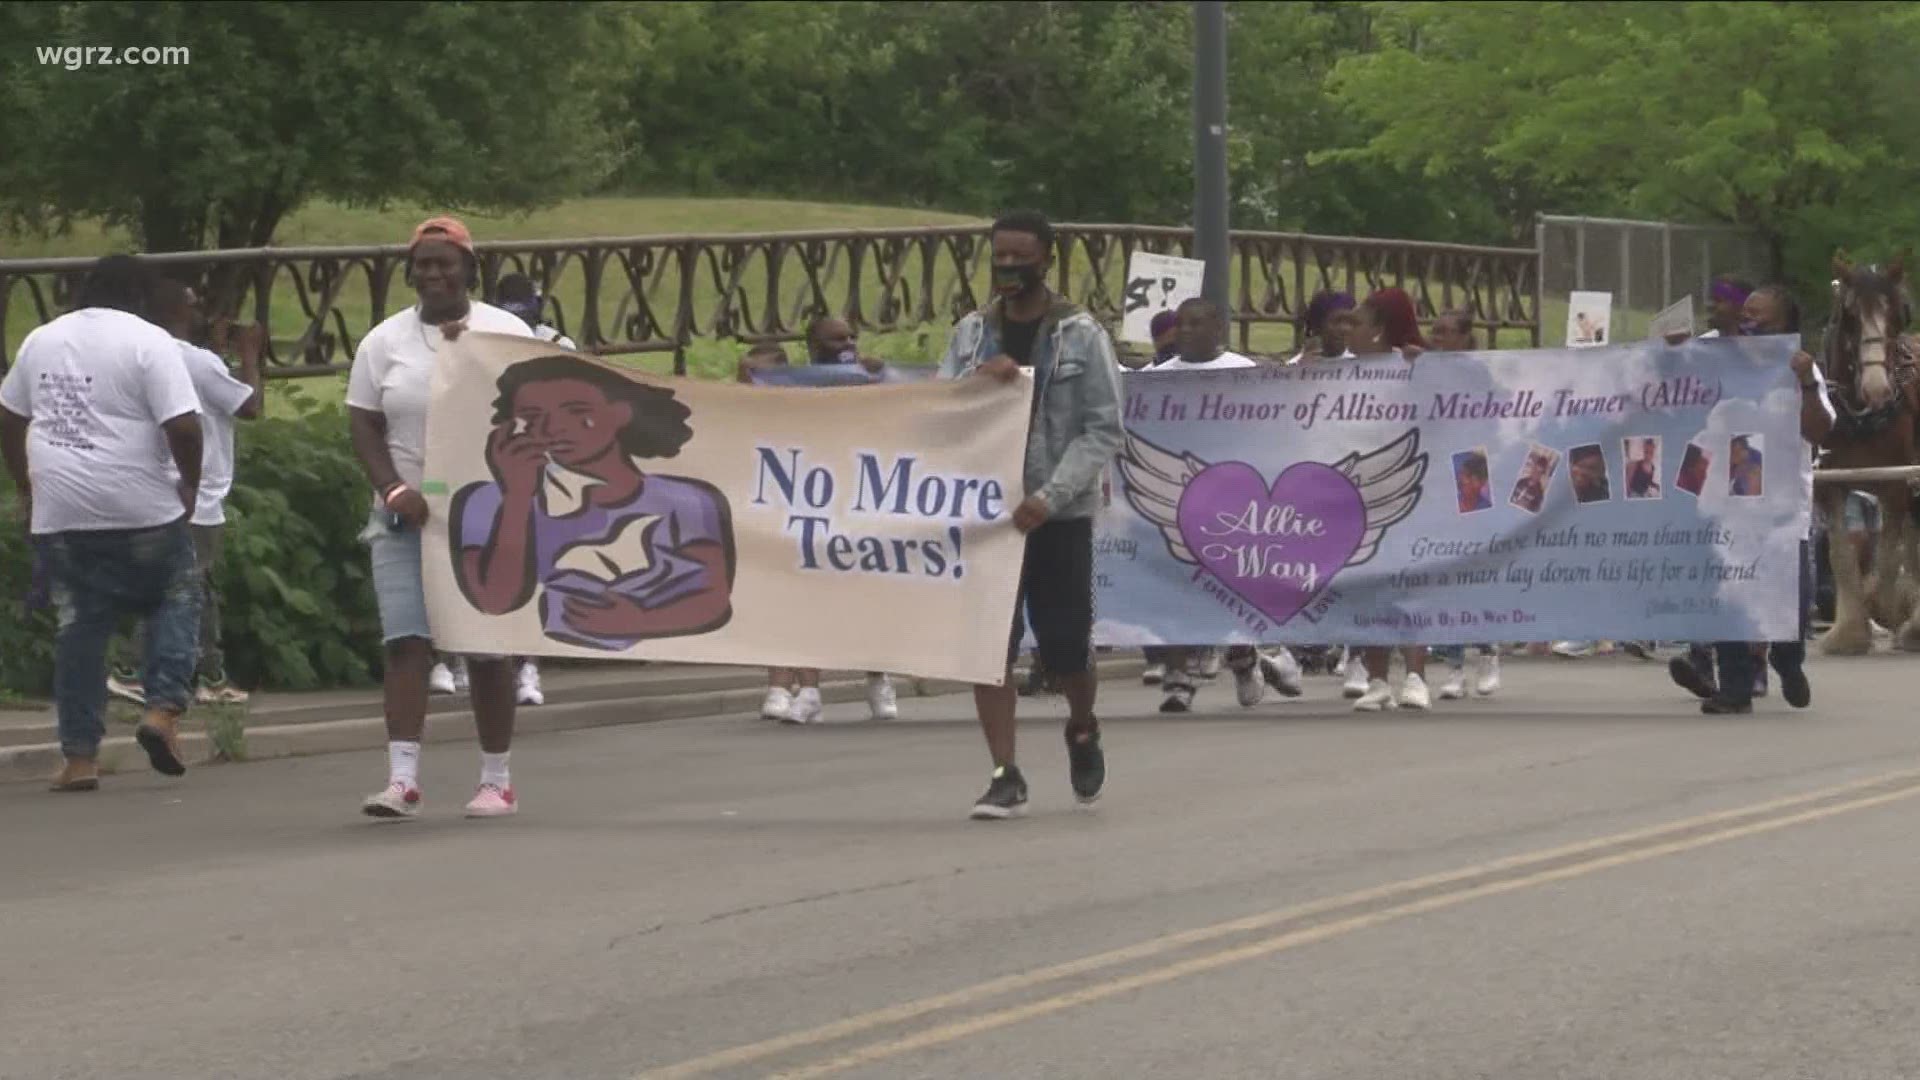 Buffalo neighbors came together to show support for a family impact by domestic violence.